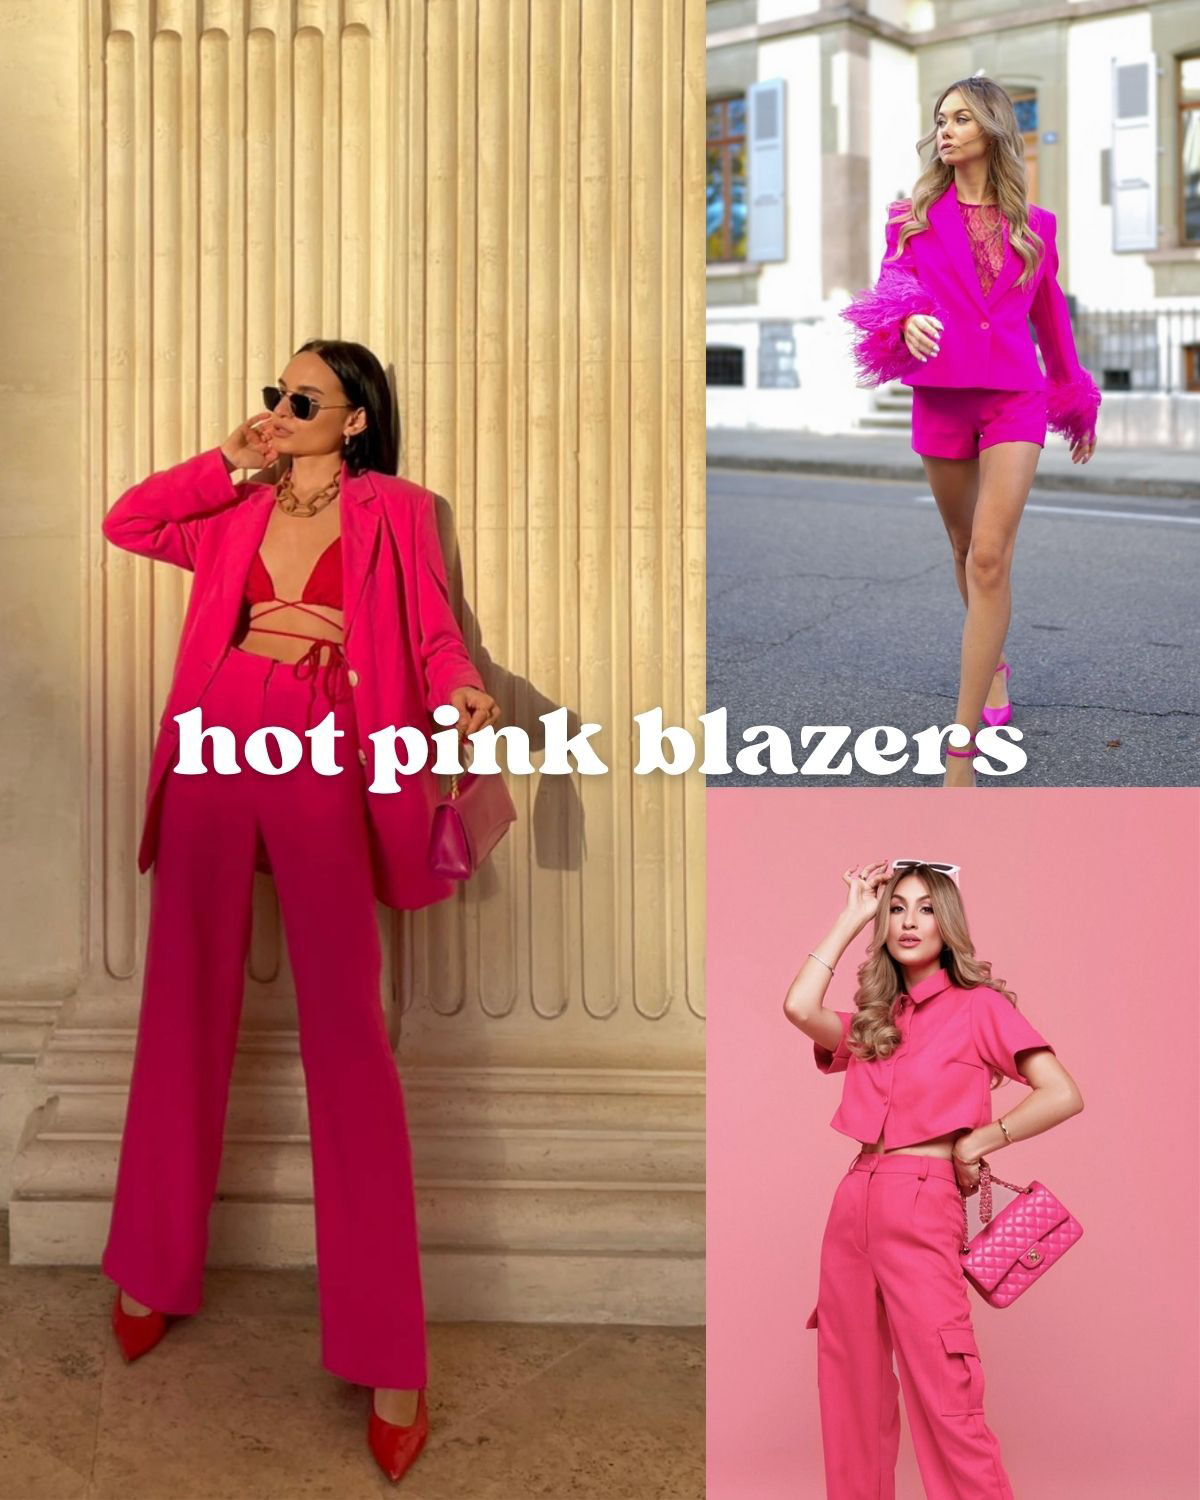 Girls wearing different kinds of hot pink blazers.